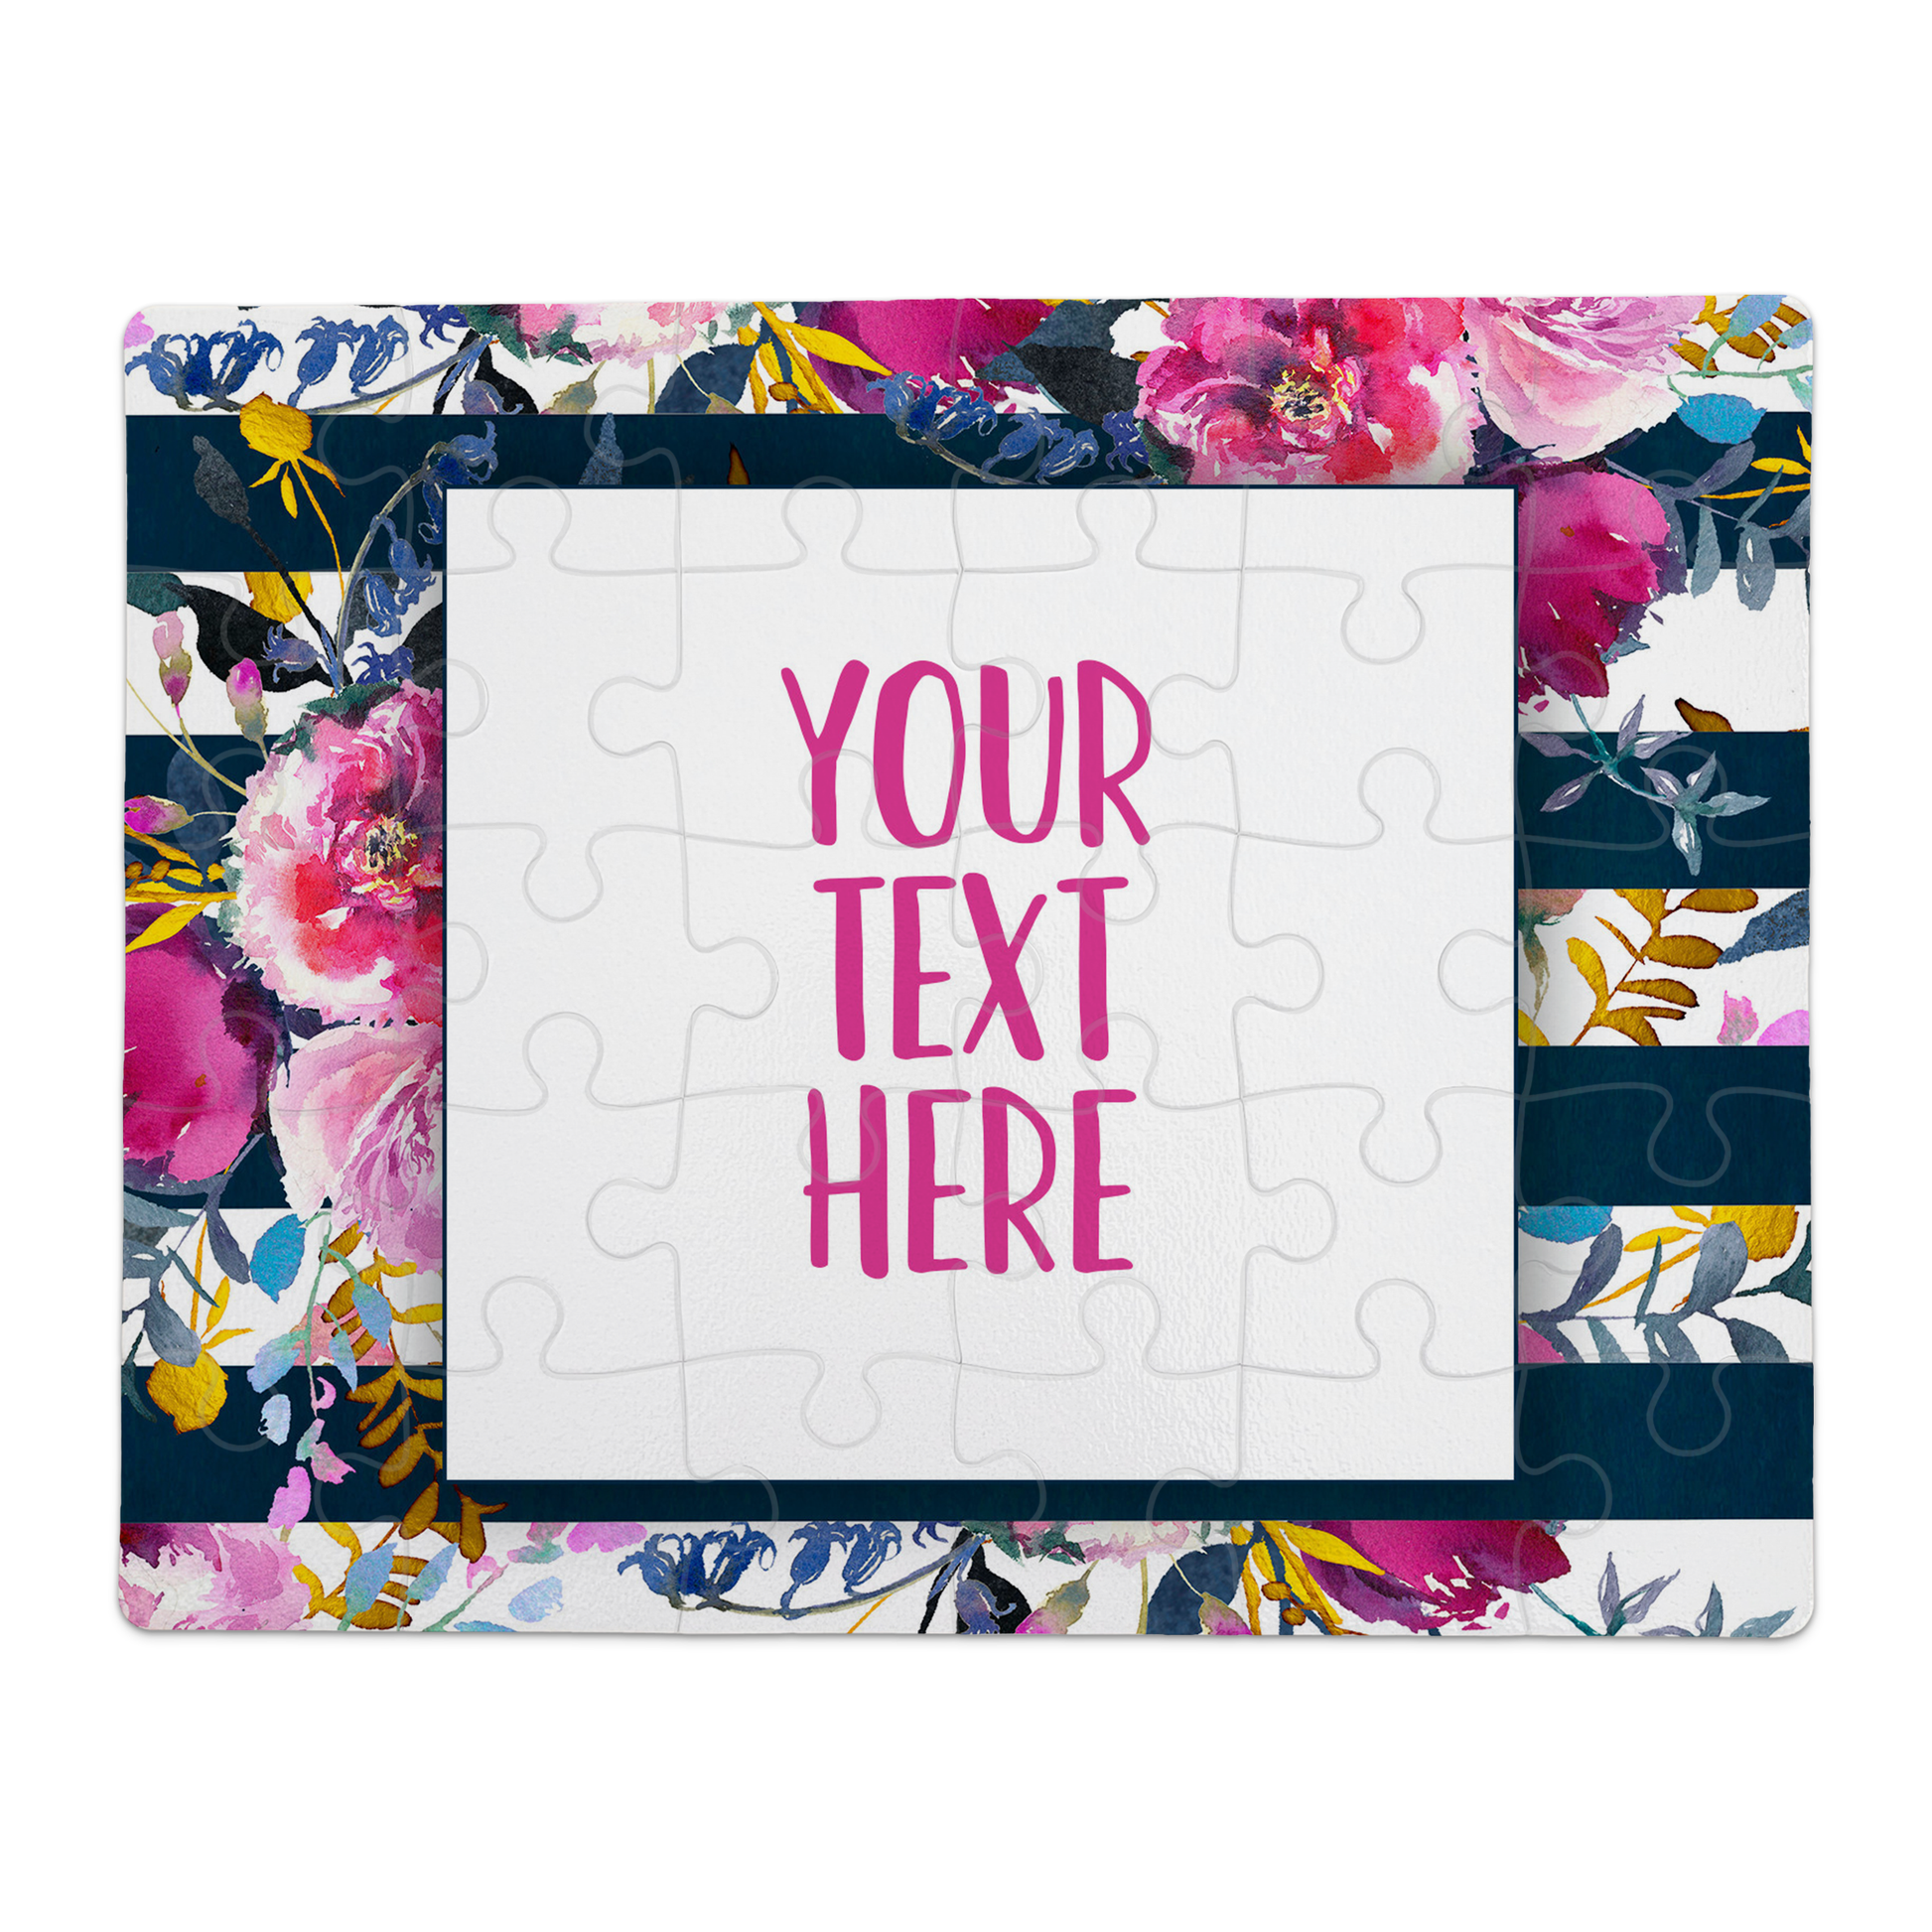 Create Your Own Puzzle - Floral Design - CYOP0026